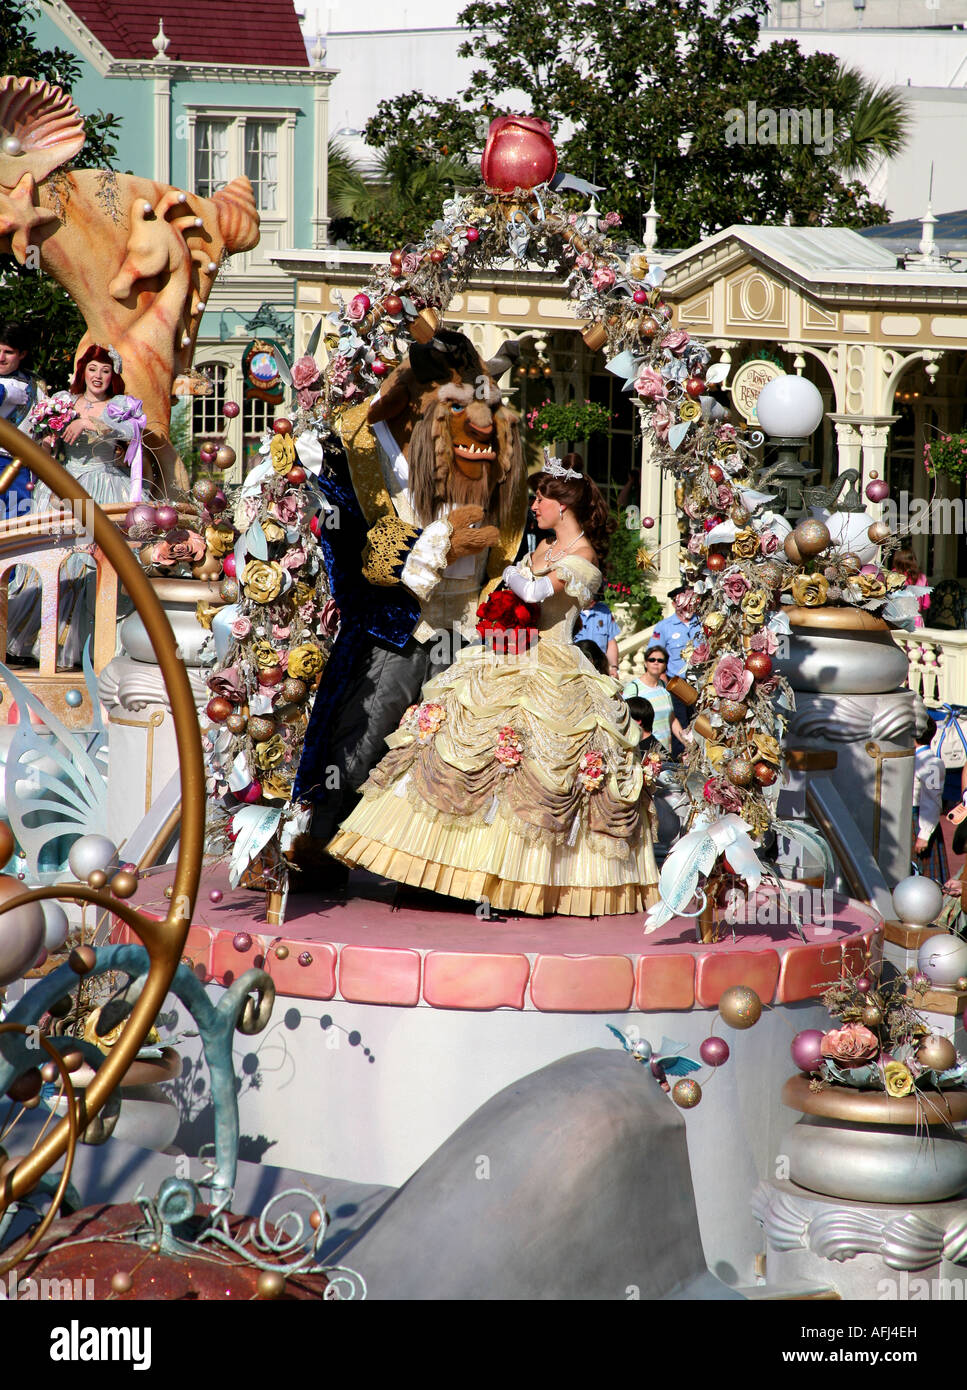 Disney characters on a Magic Kingdom afternoon parade at Orlando Florida Belle Beauty and the Beast Stock Photo